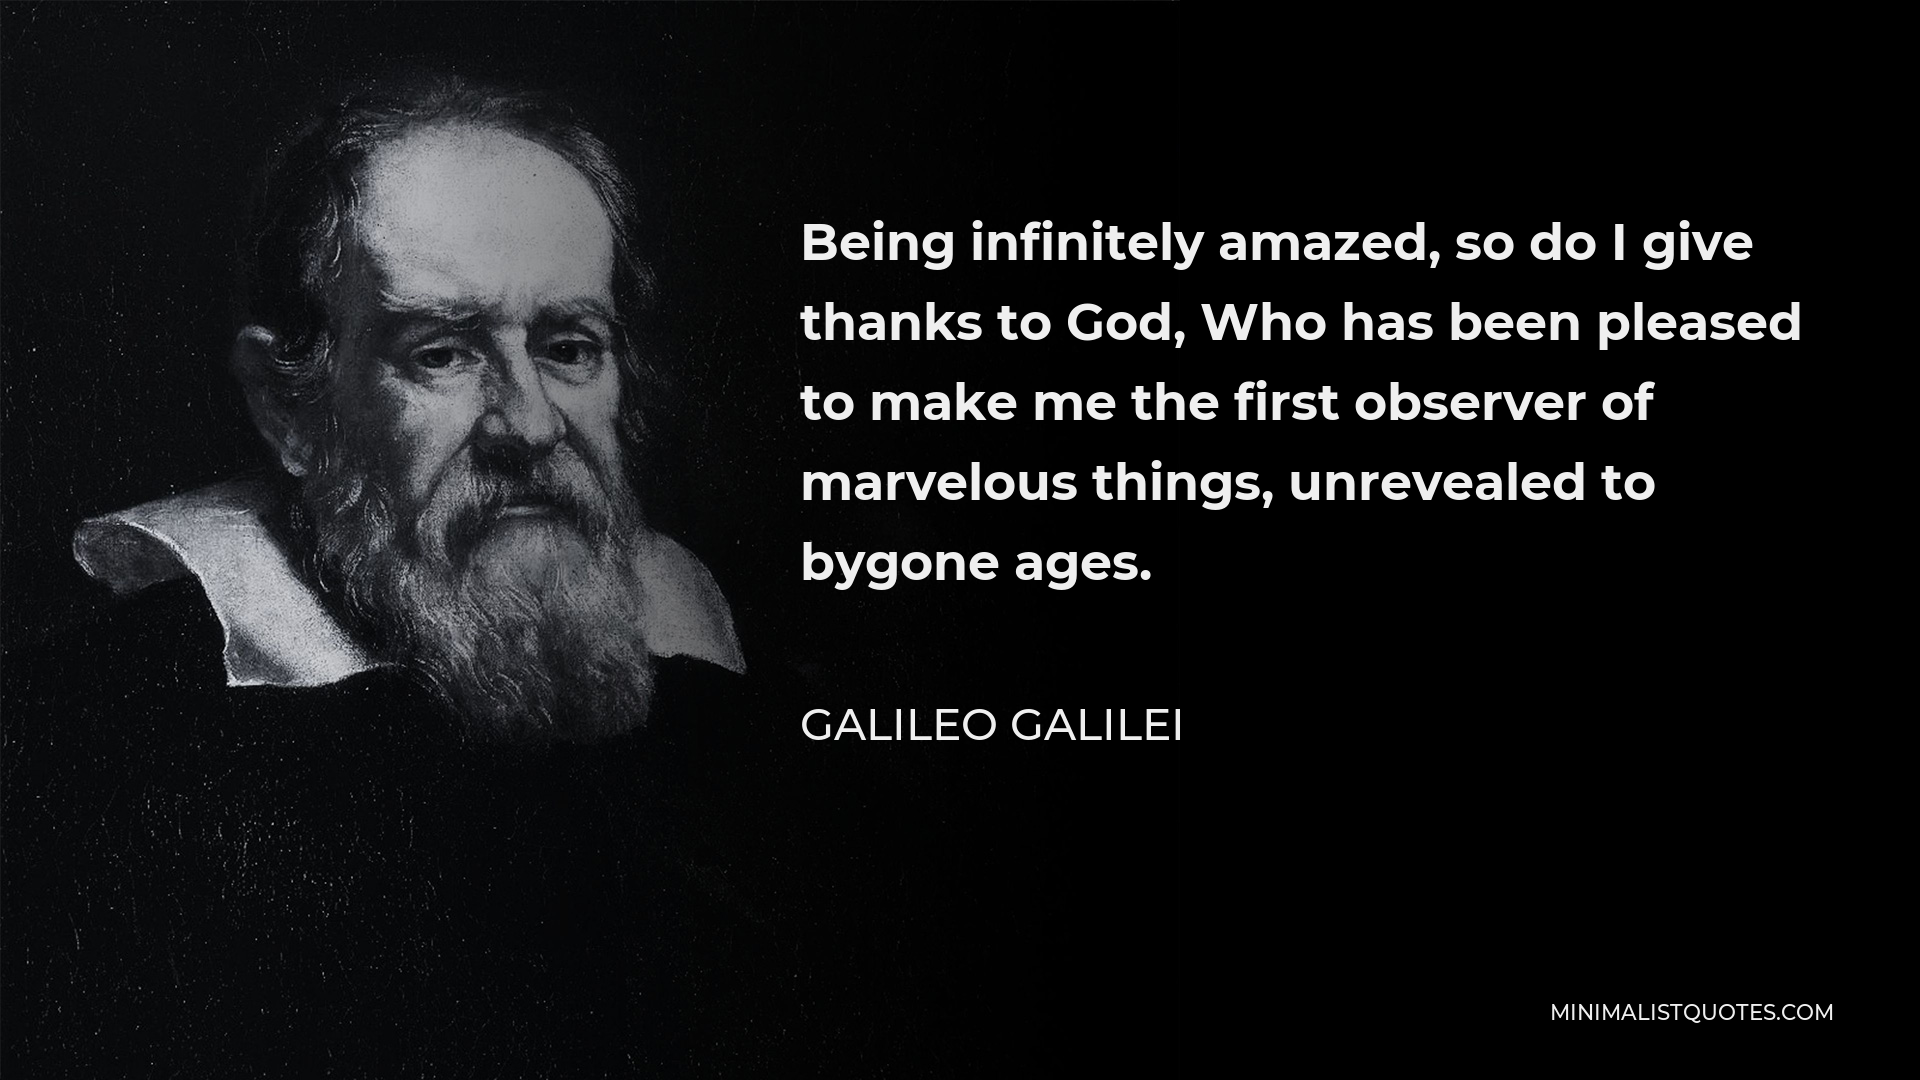 Galileo Galilei Quote - Being infinitely amazed, so do I give thanks to God, Who has been pleased to make me the first observer of marvelous things, unrevealed to bygone ages.